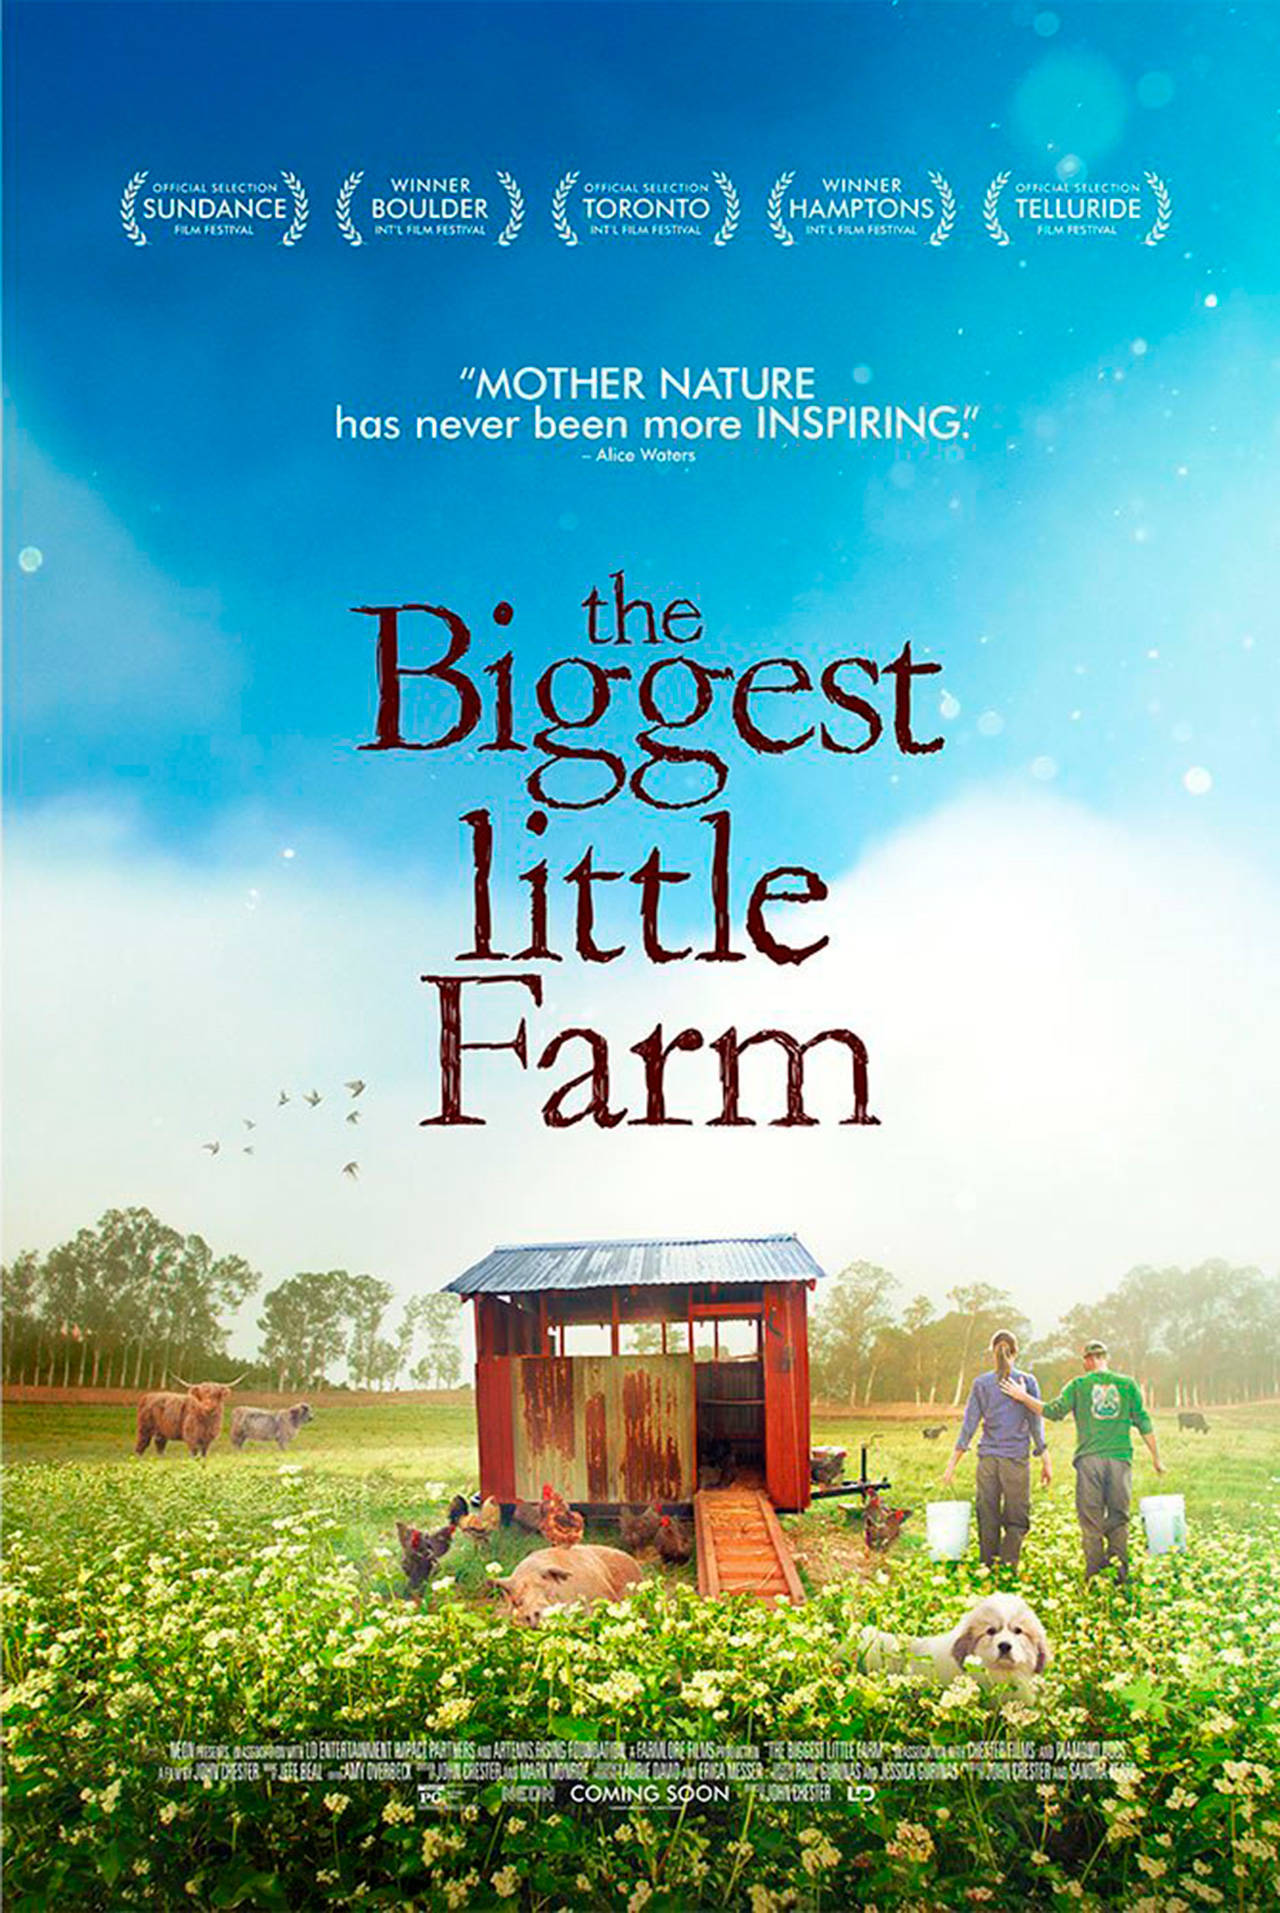 Movies That Matter returns with ‘The Biggest Little Farm’